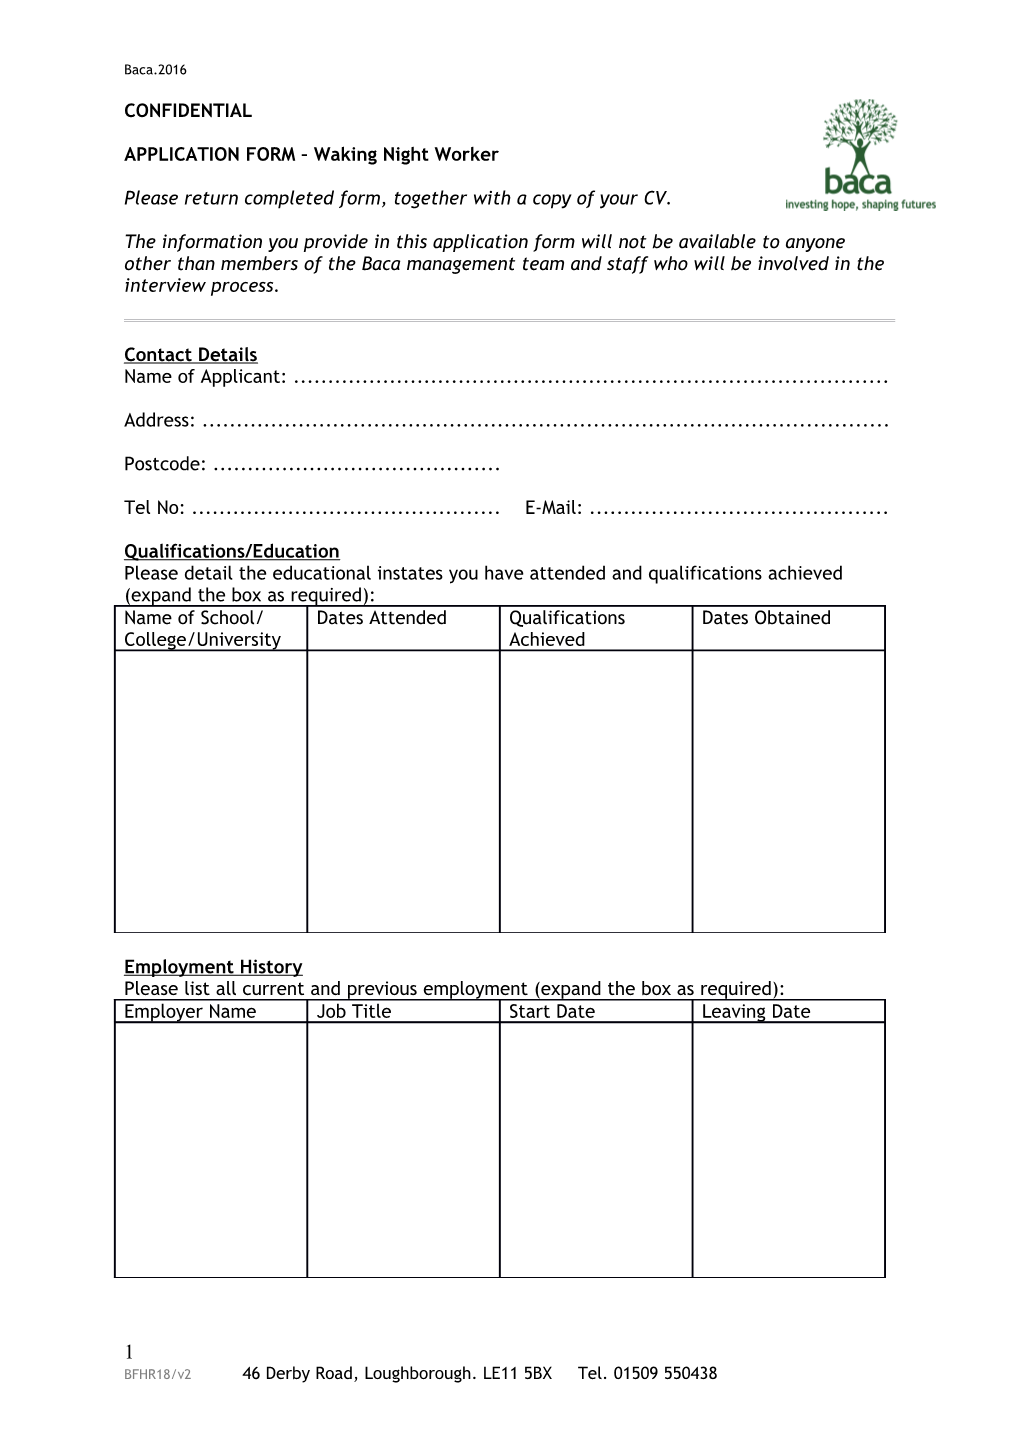 APPLICATION FORM Waking Night Worker